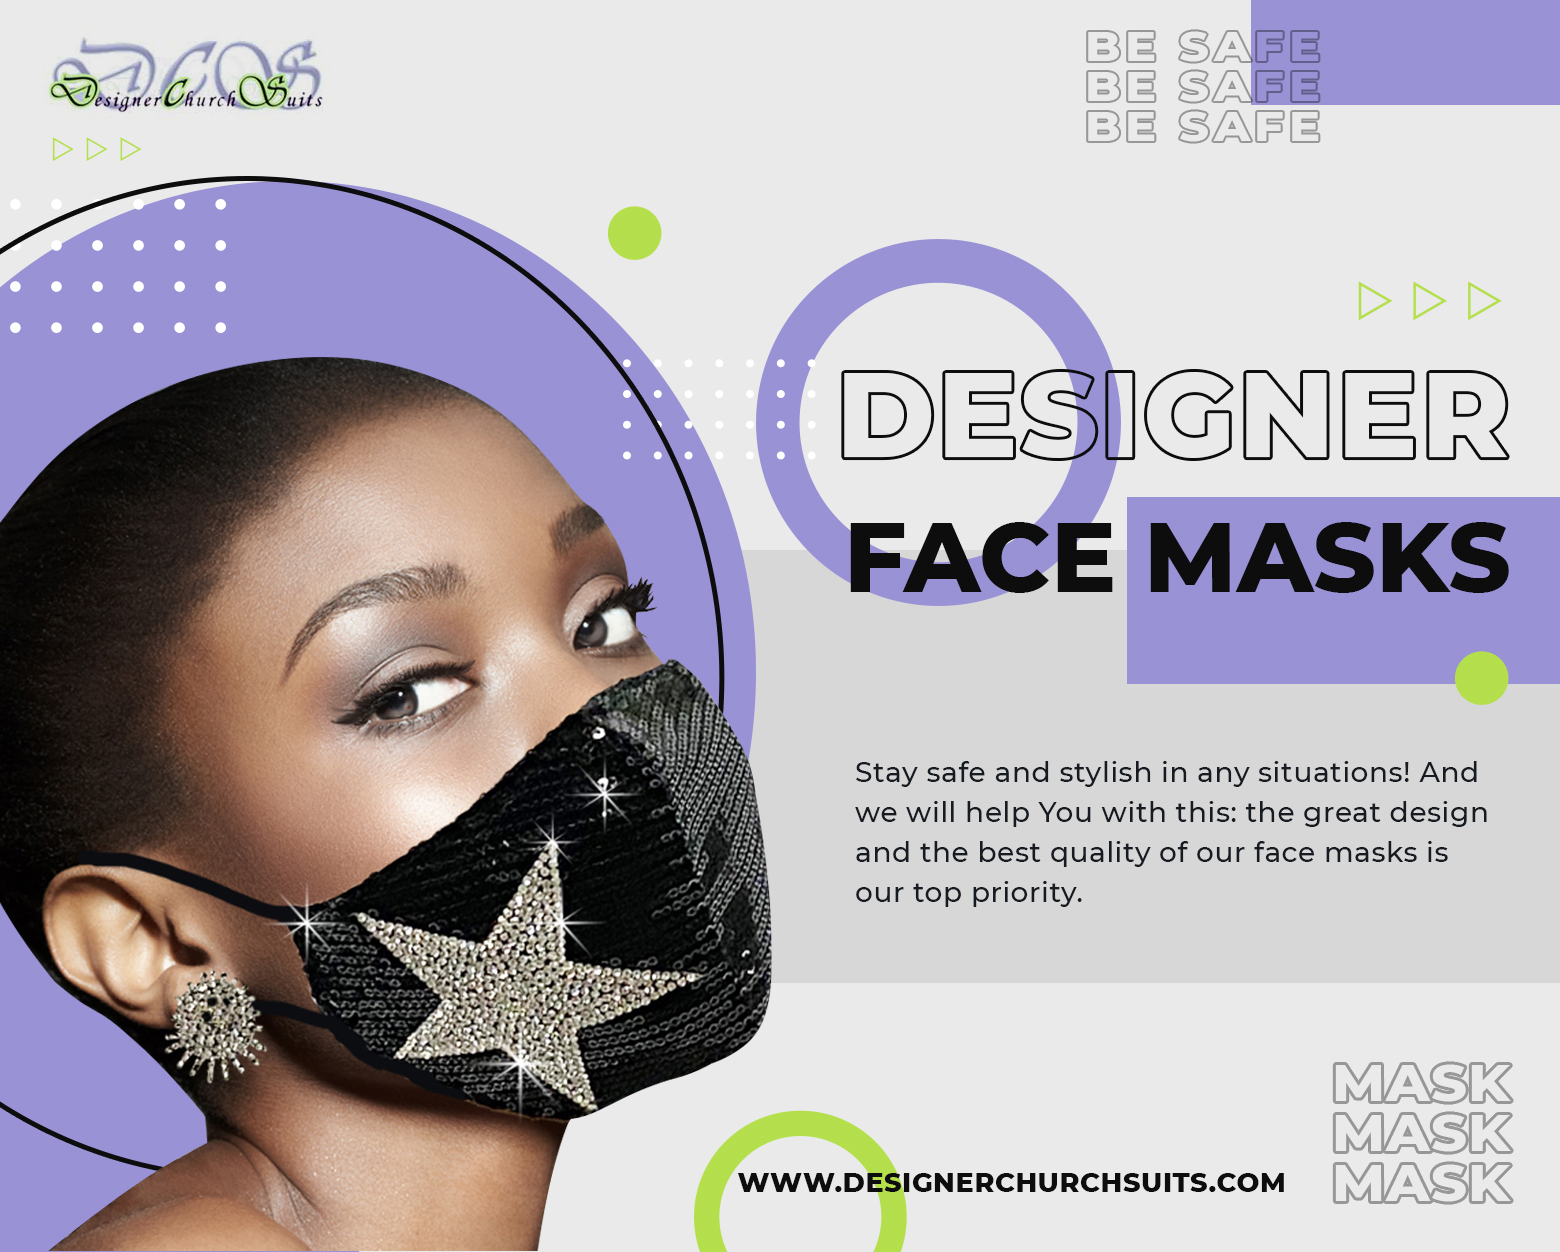 Designer Face Masks Are The New Normal. Get Yours!